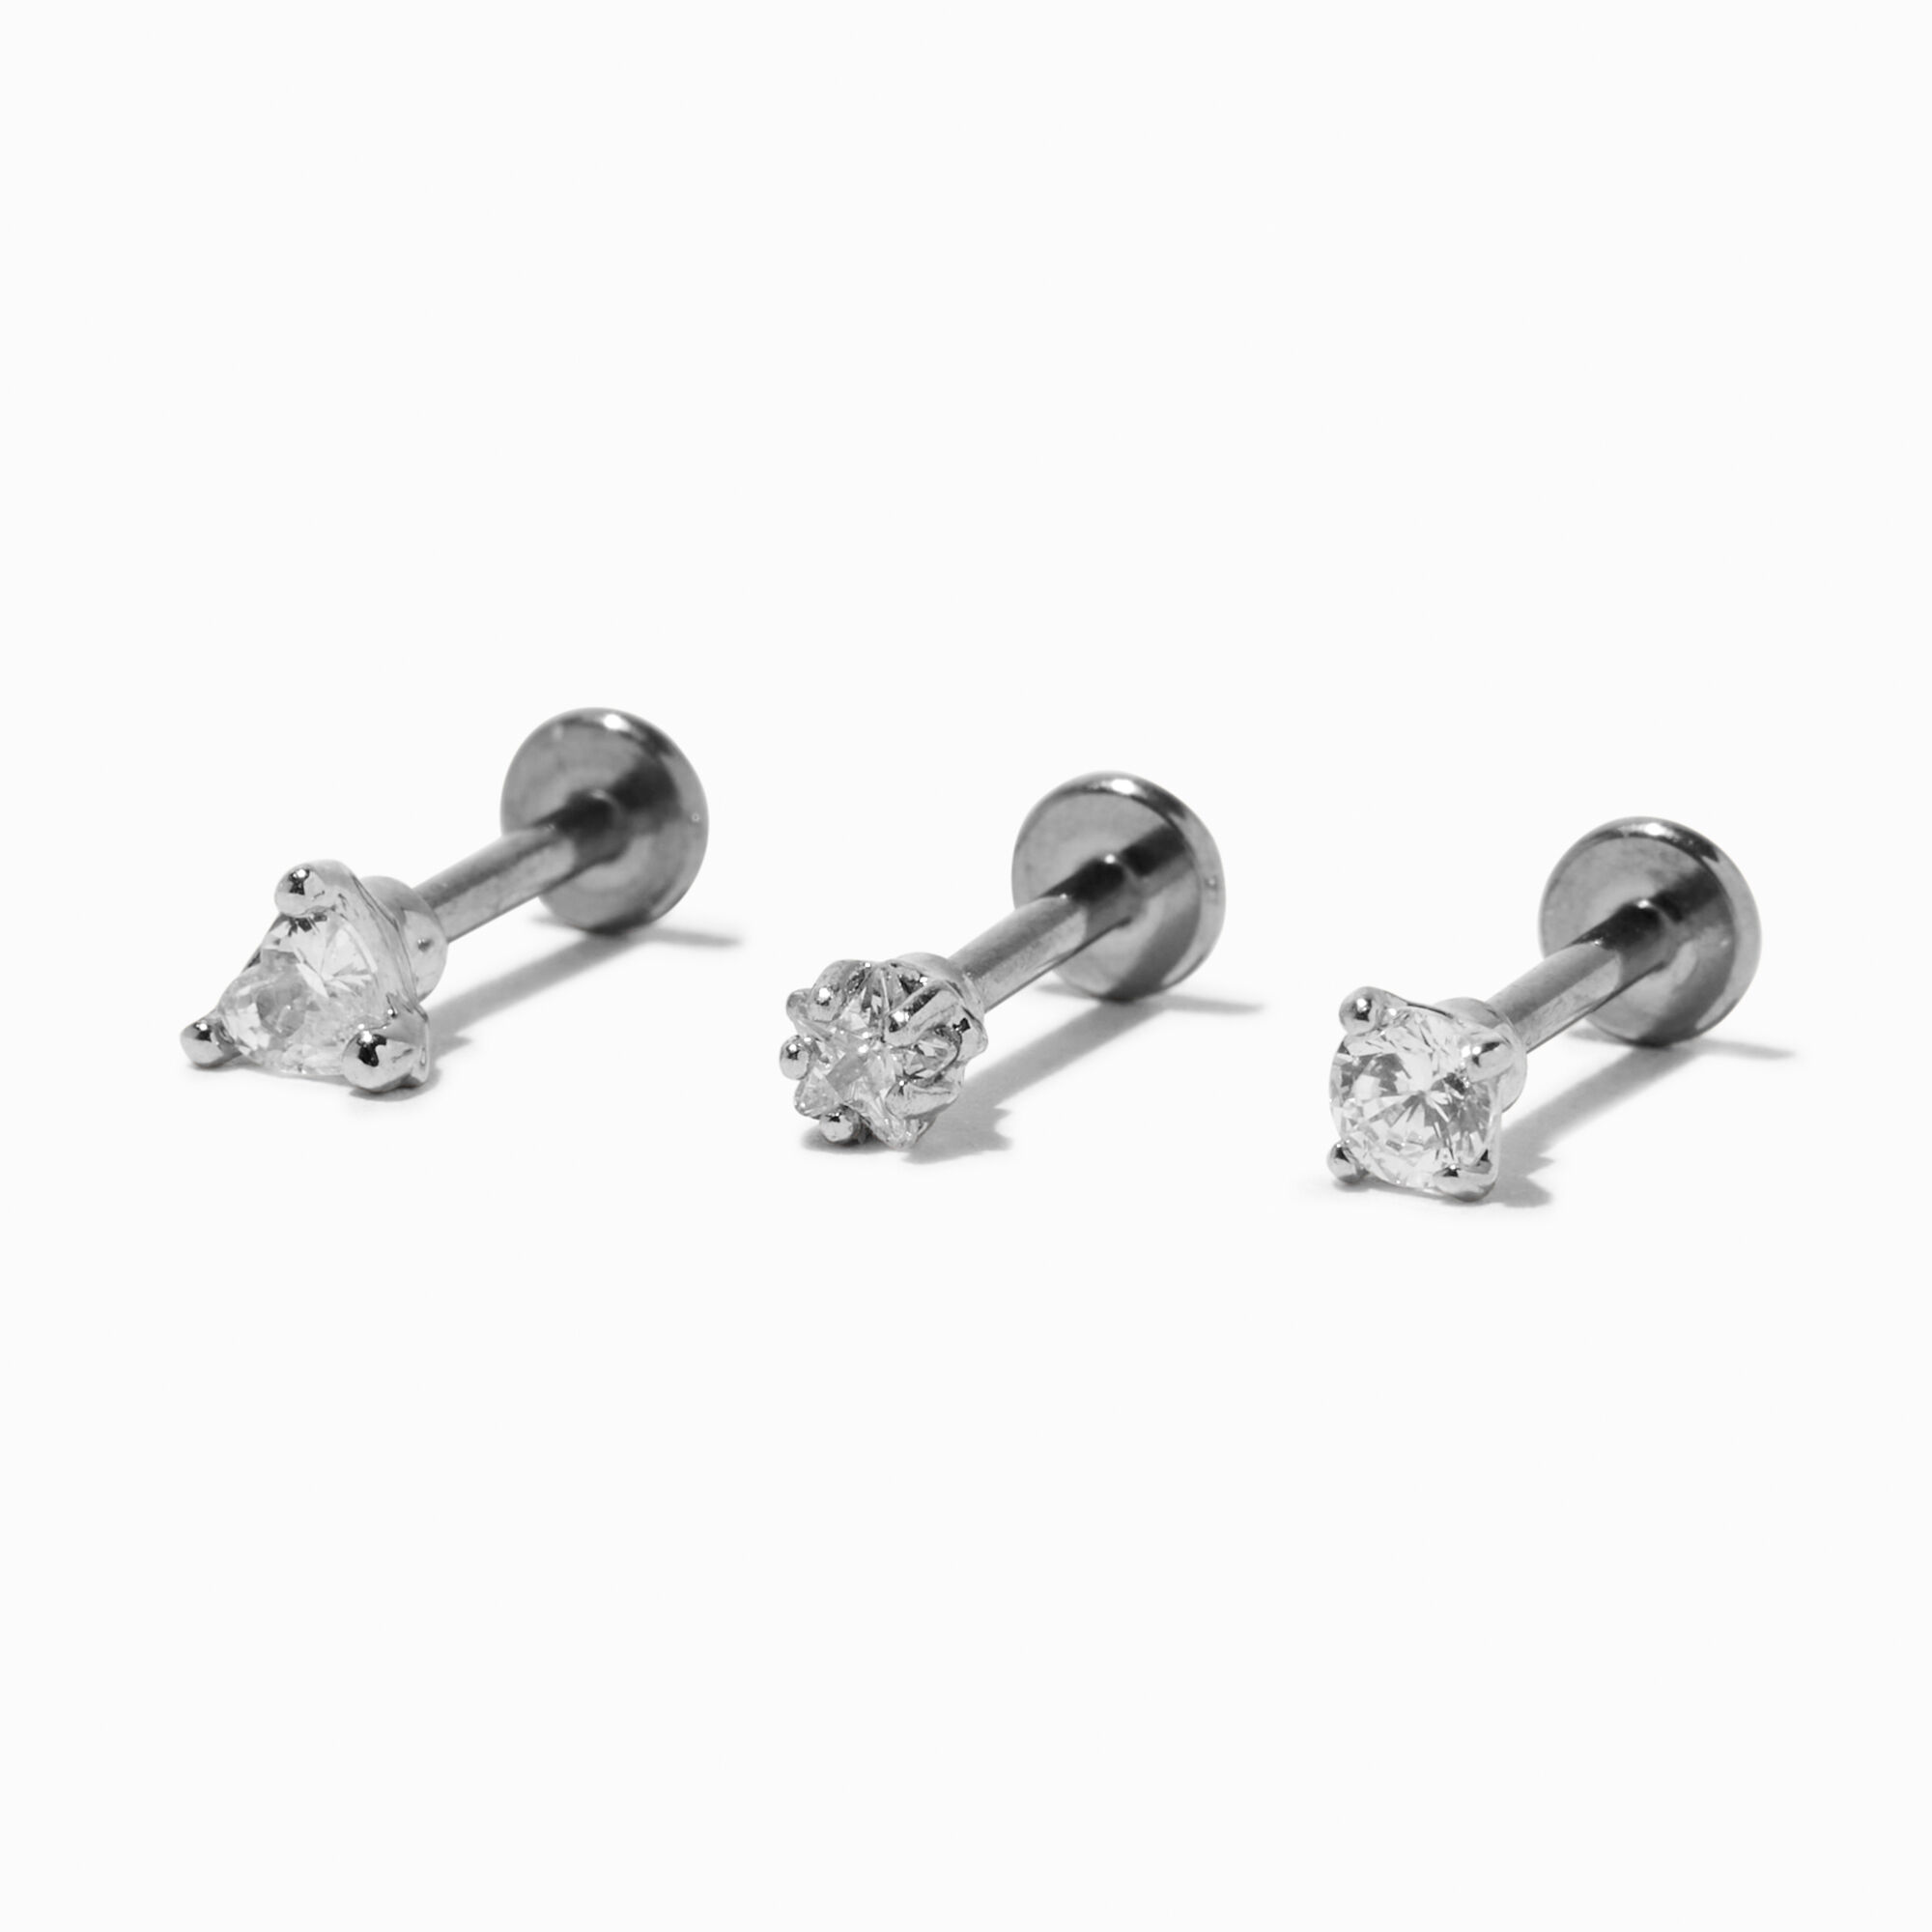 Claire's Women's Aqua Barbell Tongue Rings, 14G/1.63mm, Stainless Steel, 5  Pack - Walmart.com